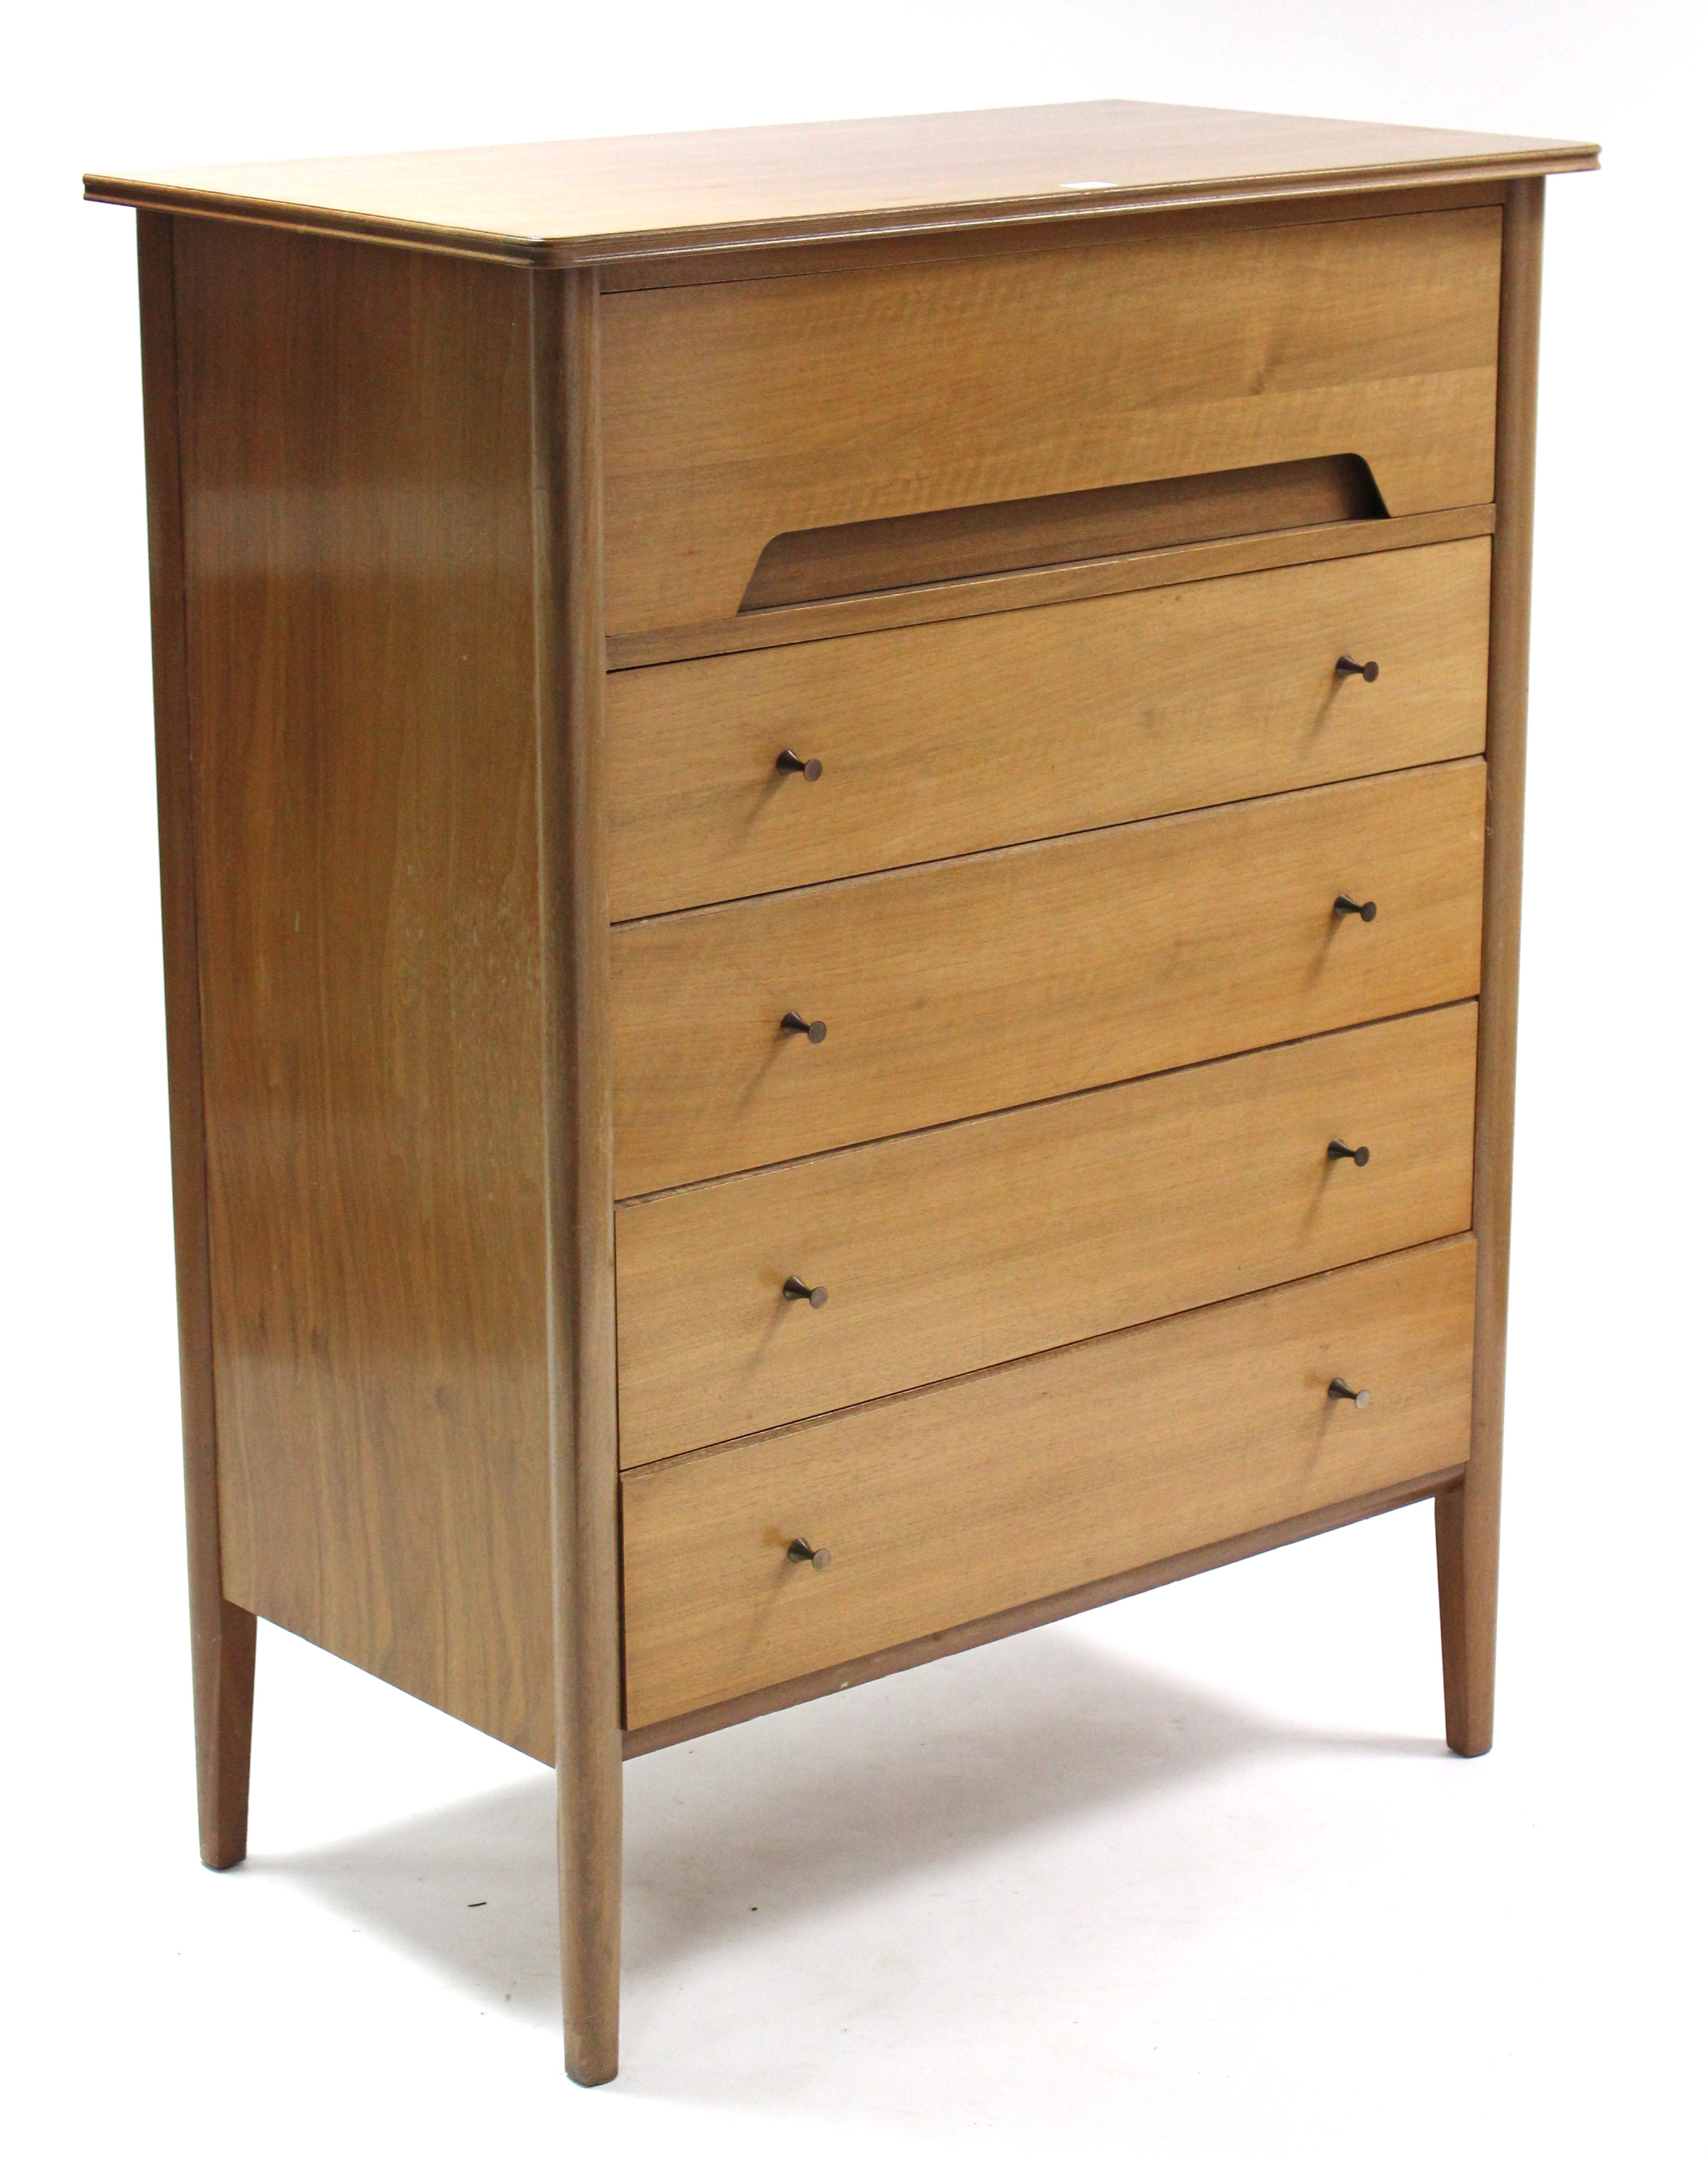 A mid-20th century mahogany-finish upright chest, fitted five long graduated drawers, 35¼” wide x